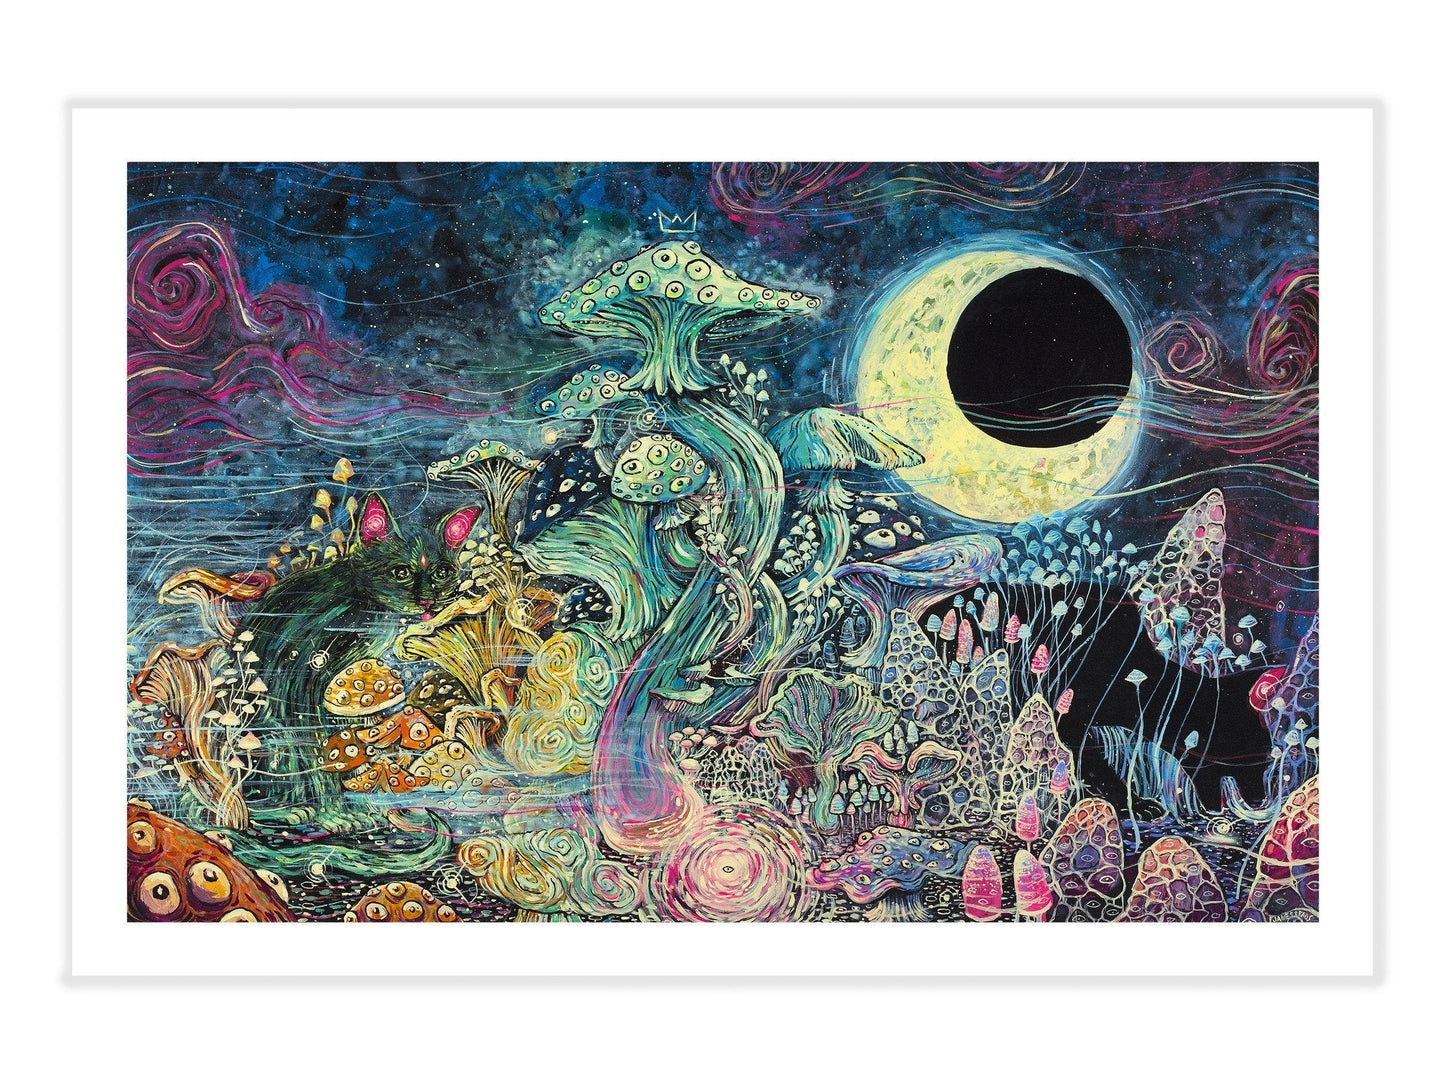 Big King Cap and His Kitty Cats (24" x 36" Edition of 25) James R. Eads